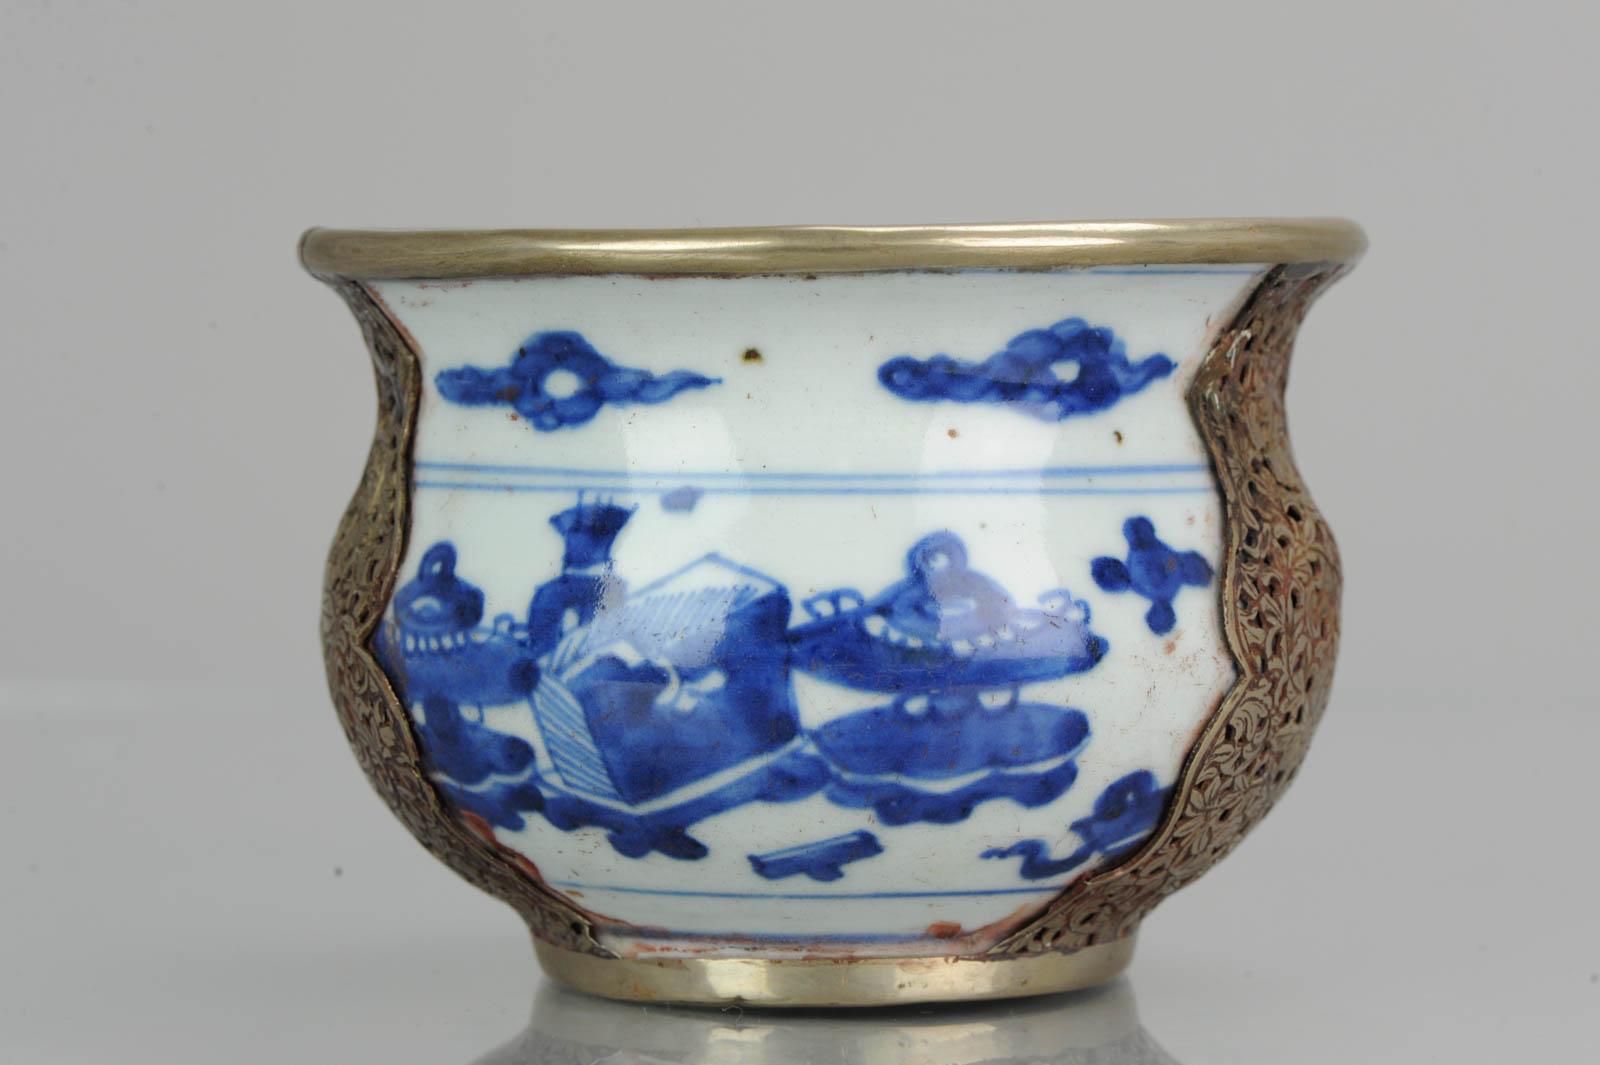  Rare 17th C Transitional Early Kangxi Chinese Porcelain China Bowl Objects For Sale 4